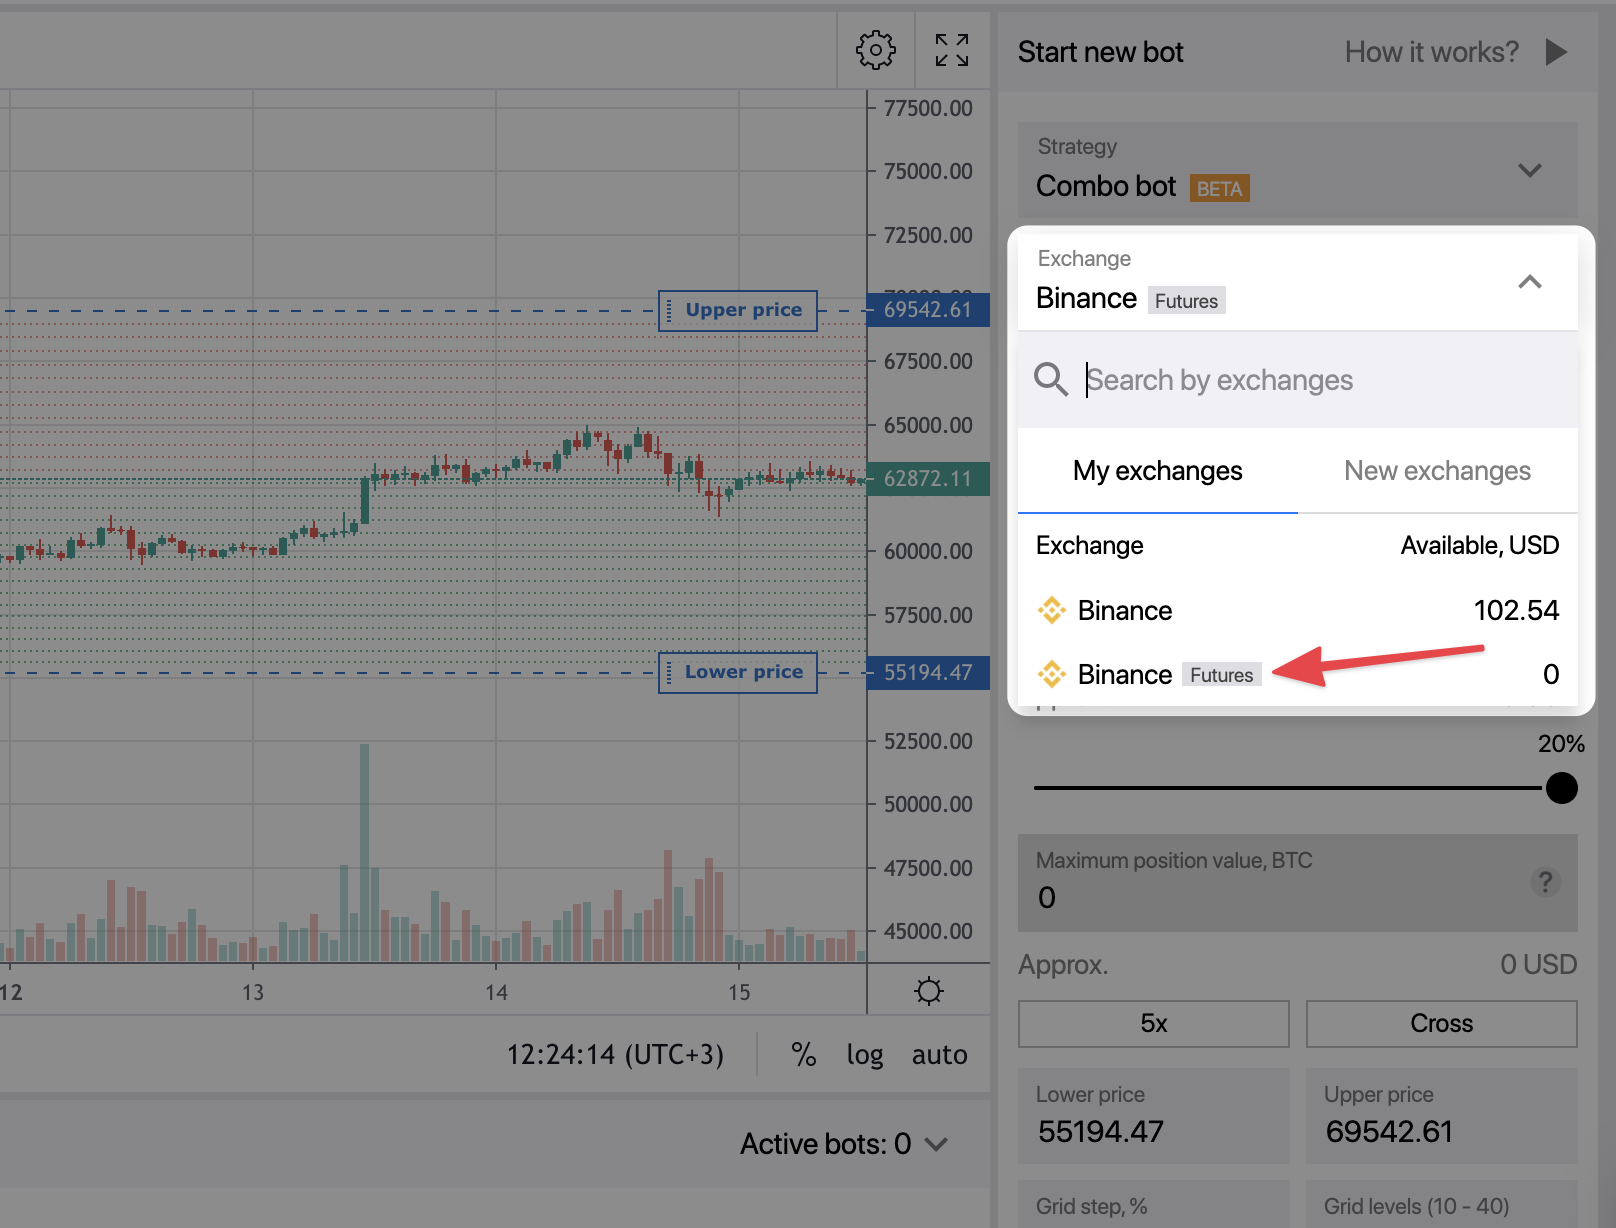 To use Bitsgap Combo bot, you will have to choose an exchange that supports futures trading, e.g. Binance Futures.